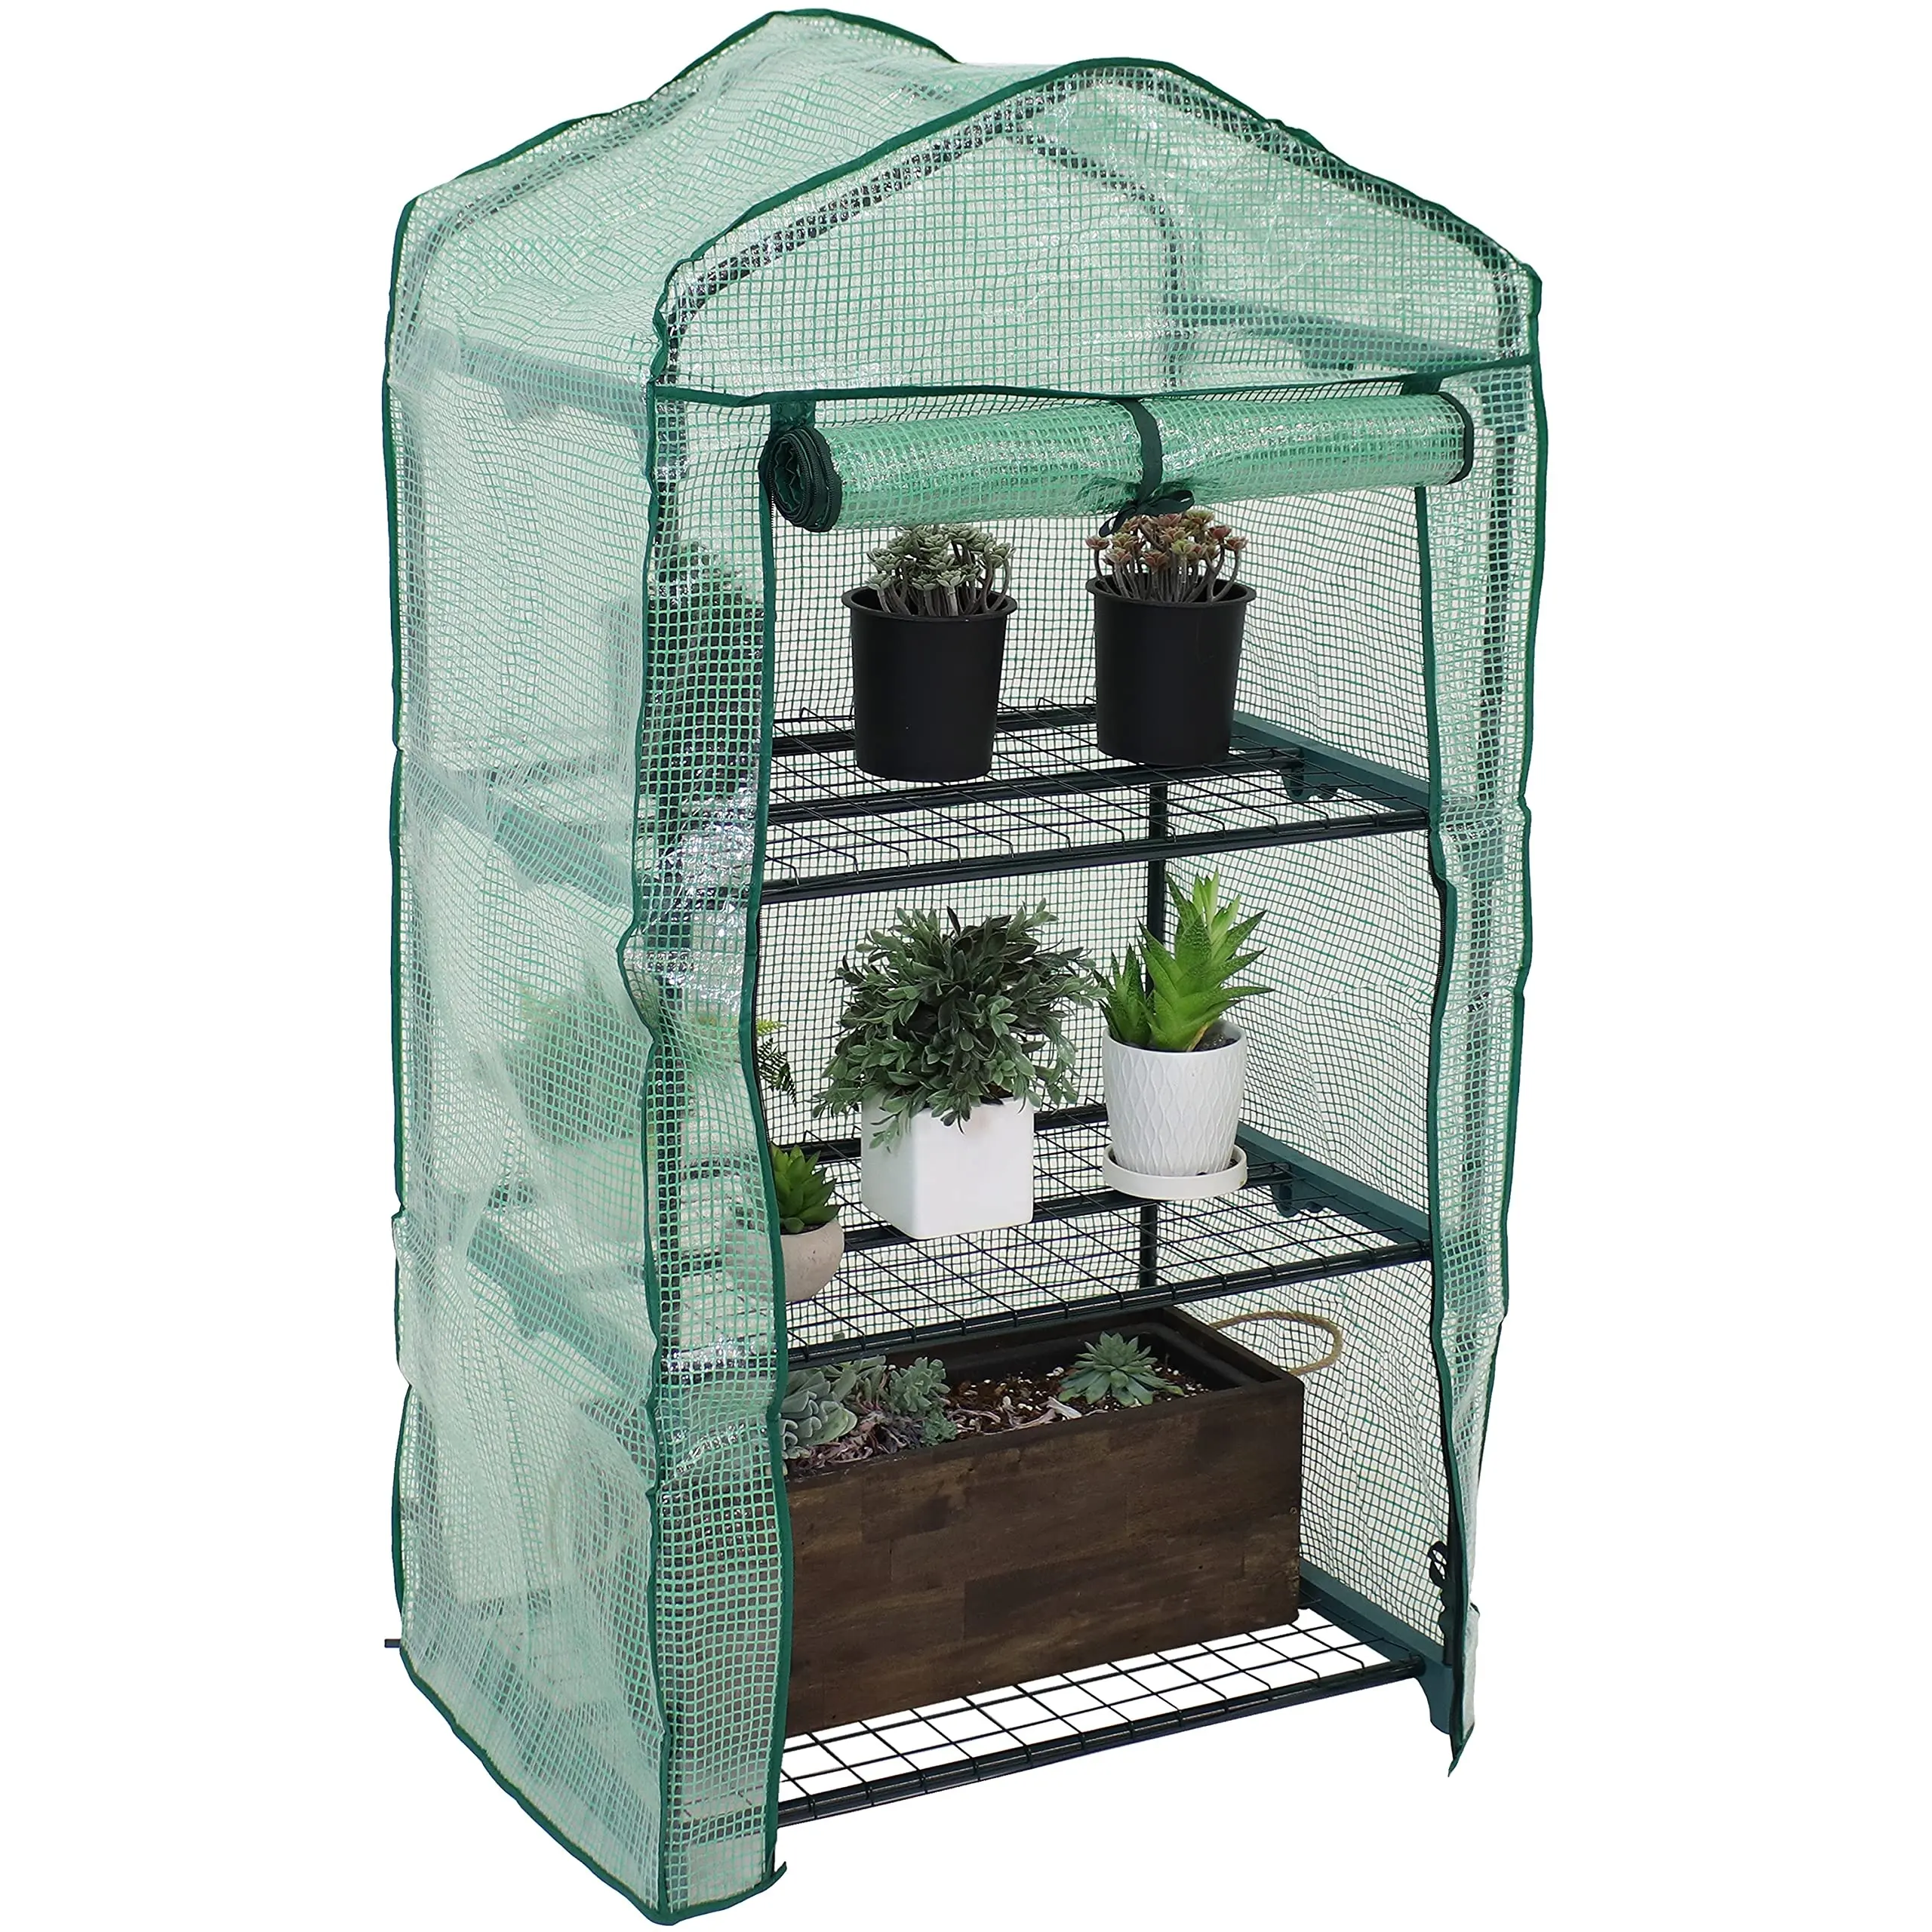 Mini Greenhouse-4-Tier Indoor Outdoor, Greenhouse for Sturdy Portable Shelves-Grow Mushroom Grow Kit for Plants, Seedling/